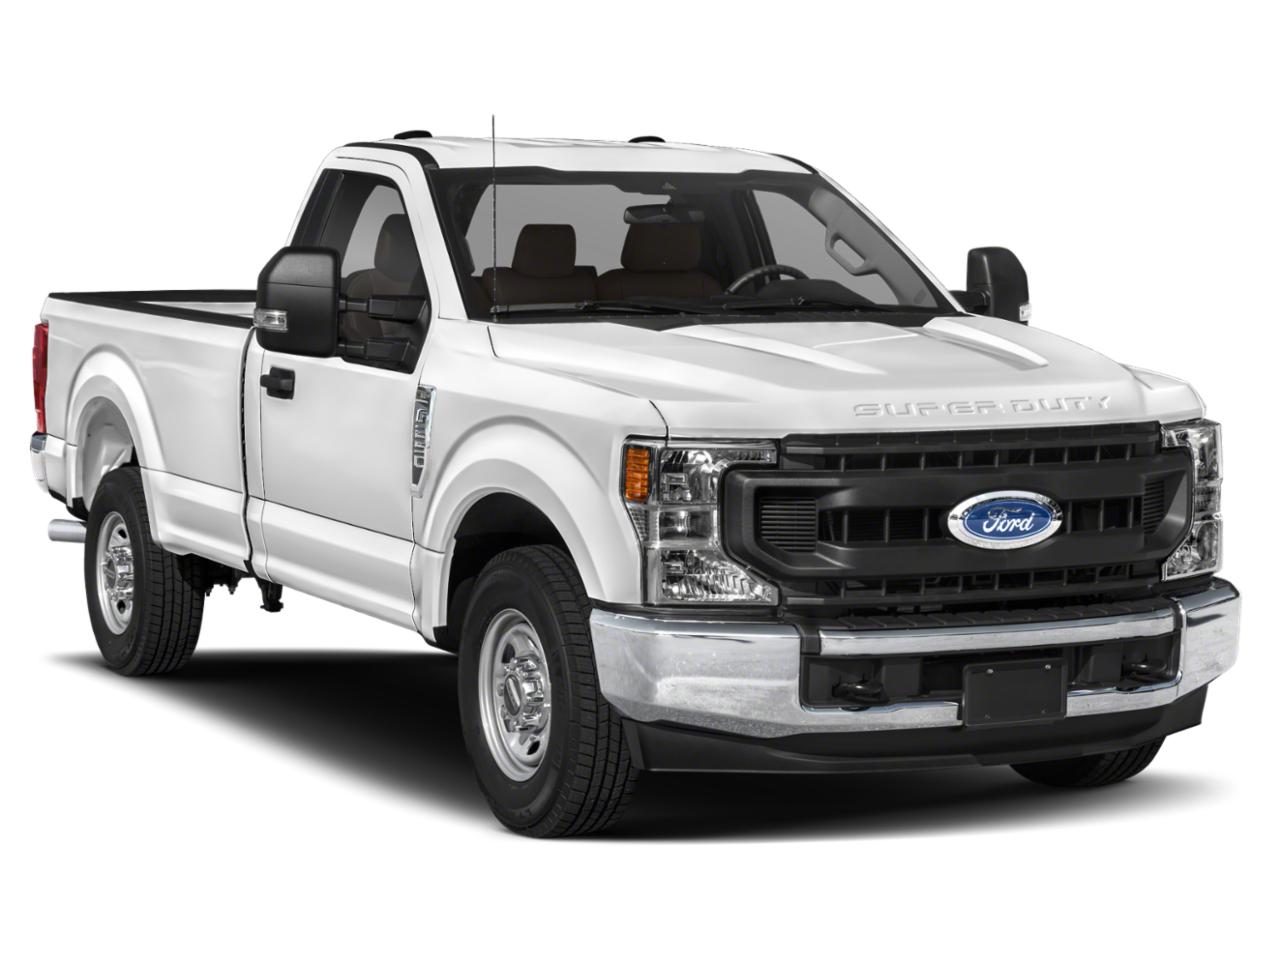 New 2022 Ford Super Duty F 250 Srw For Sale At Friendly Ford Inc